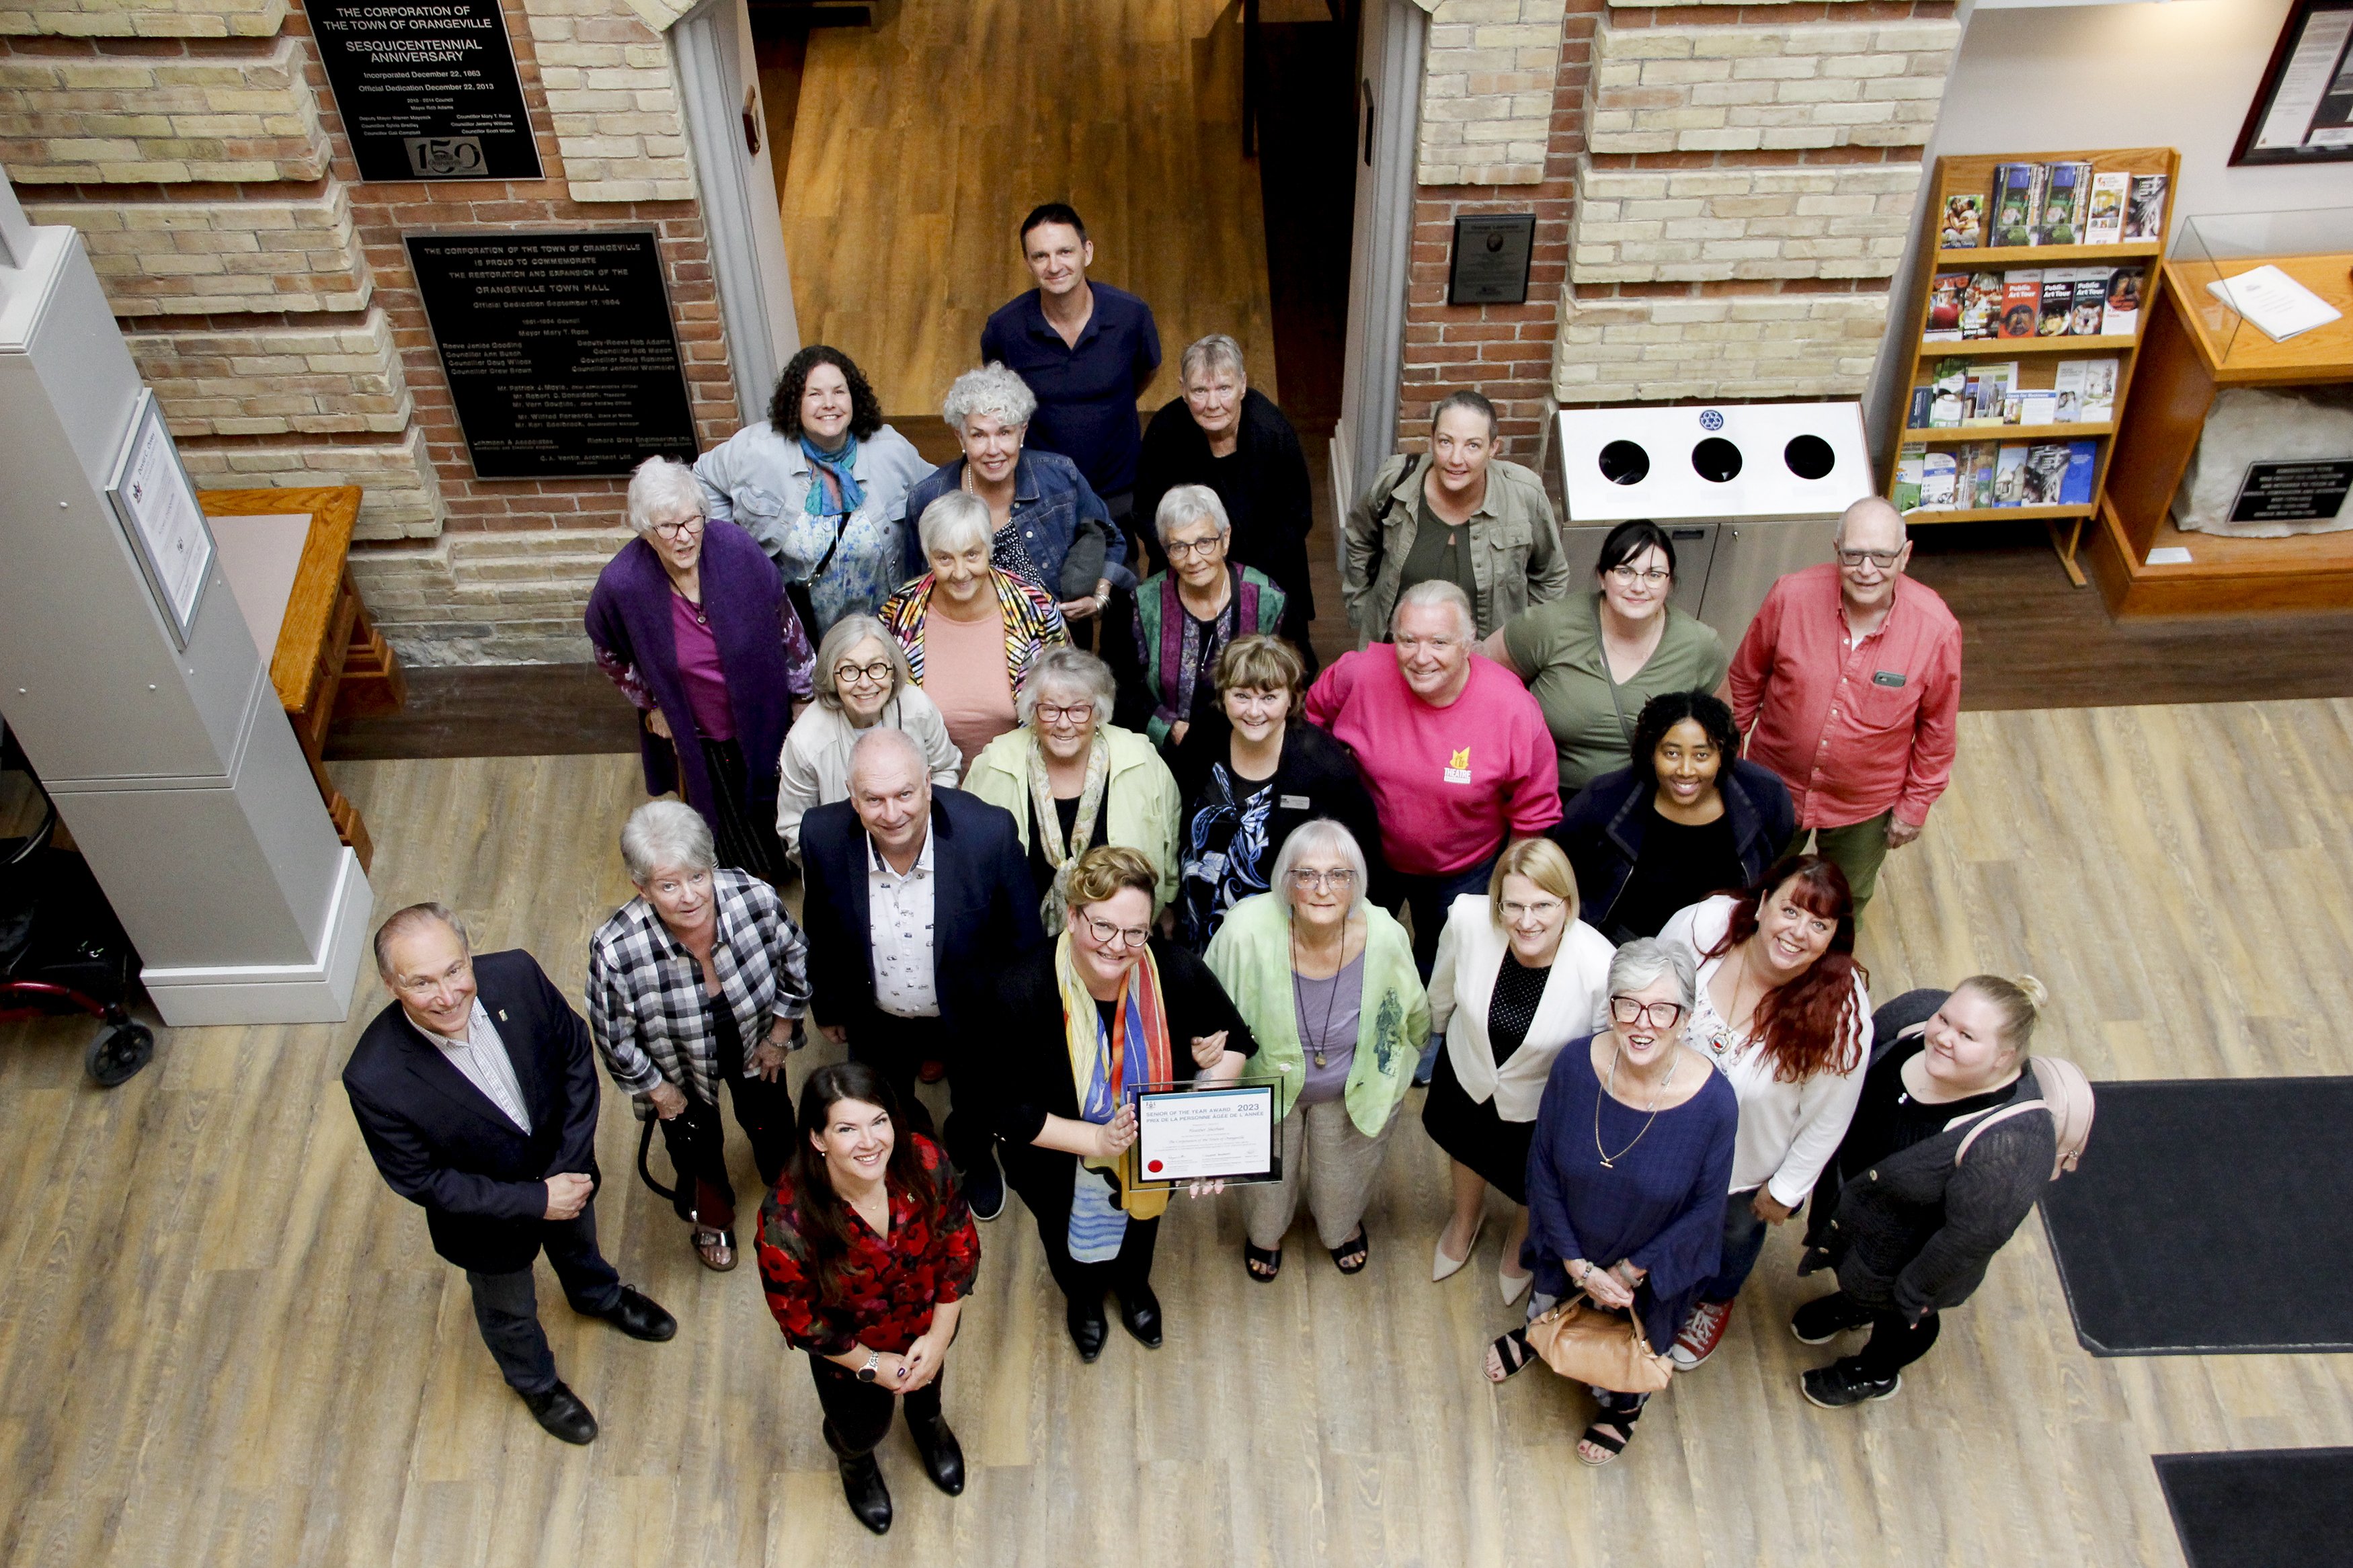 Council and supports gather in Orangeville Town Hall atrium looking up at the camera in celebration of Heather Sheehan.